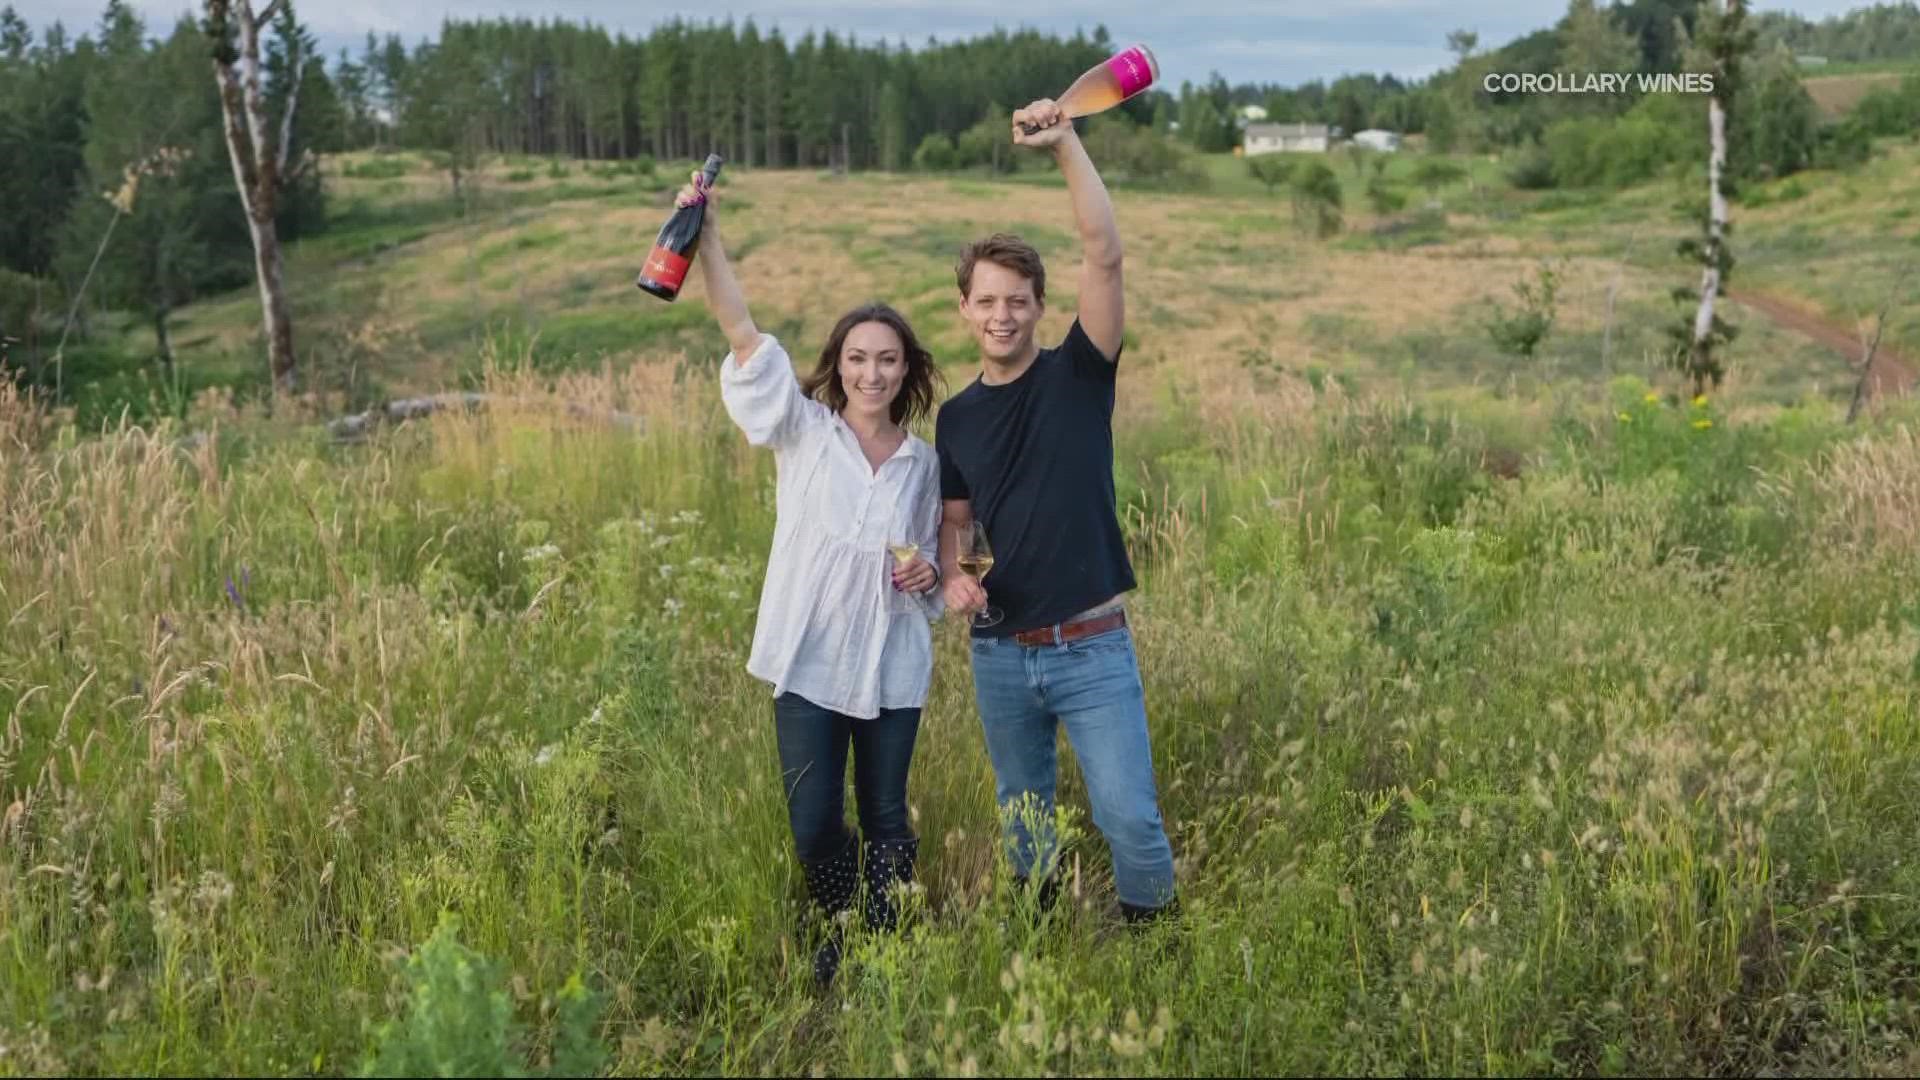 Dan Diephouse and Jeanne Feldkamp are living their dream. They bought into the Eola-Amity Hills American Viticultural Area of the Willamette Valley.